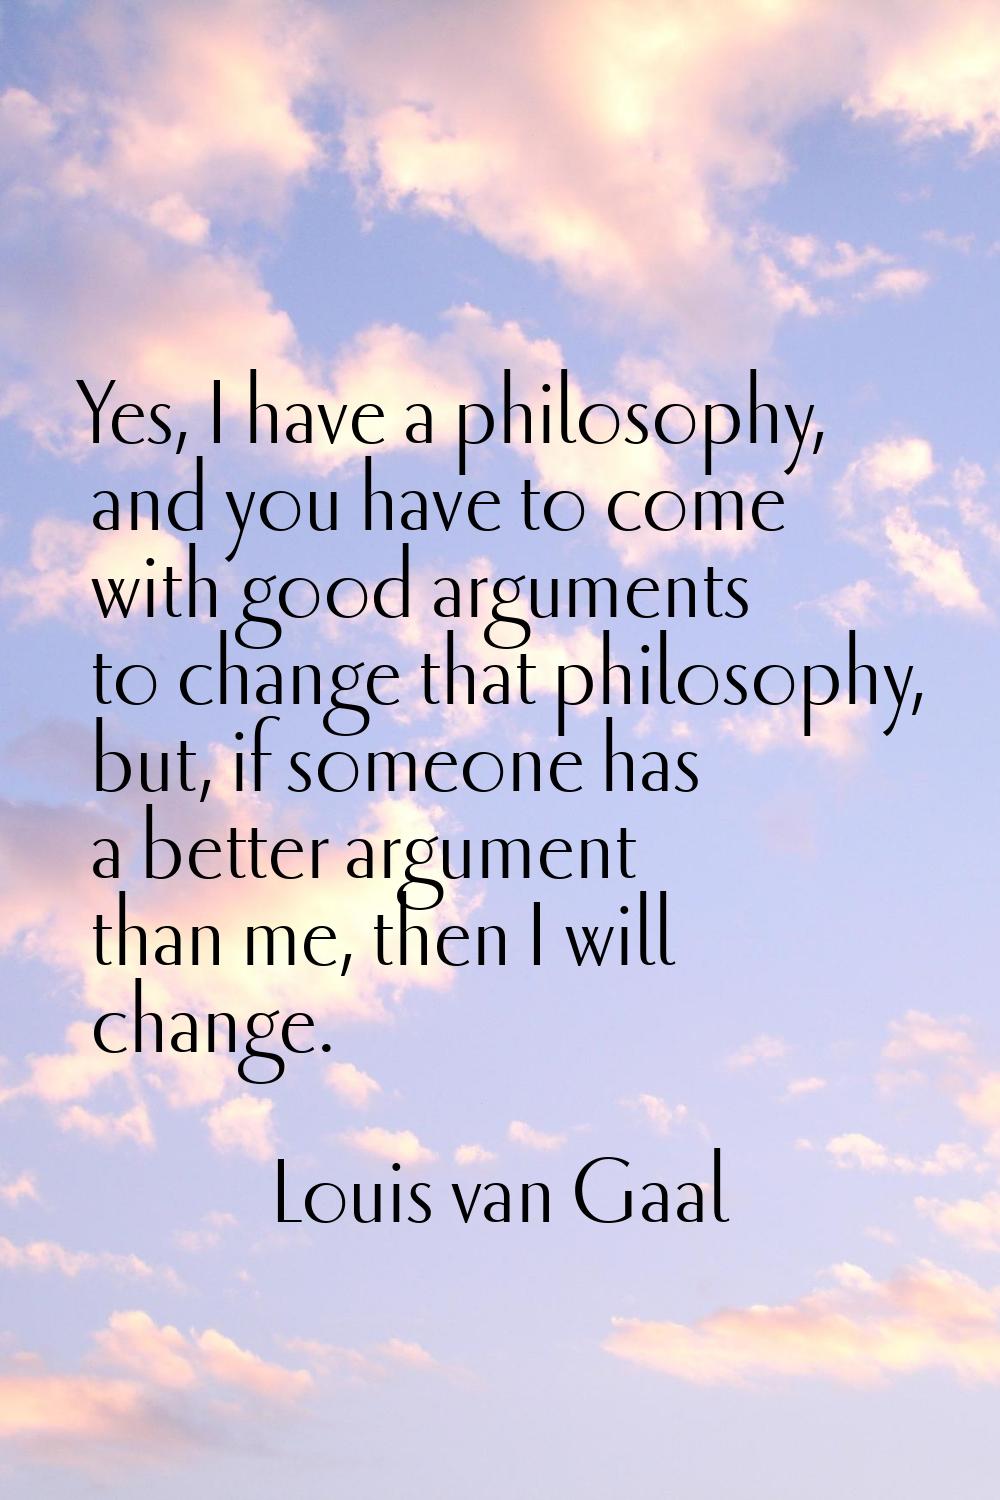 Yes, I have a philosophy, and you have to come with good arguments to change that philosophy, but, 